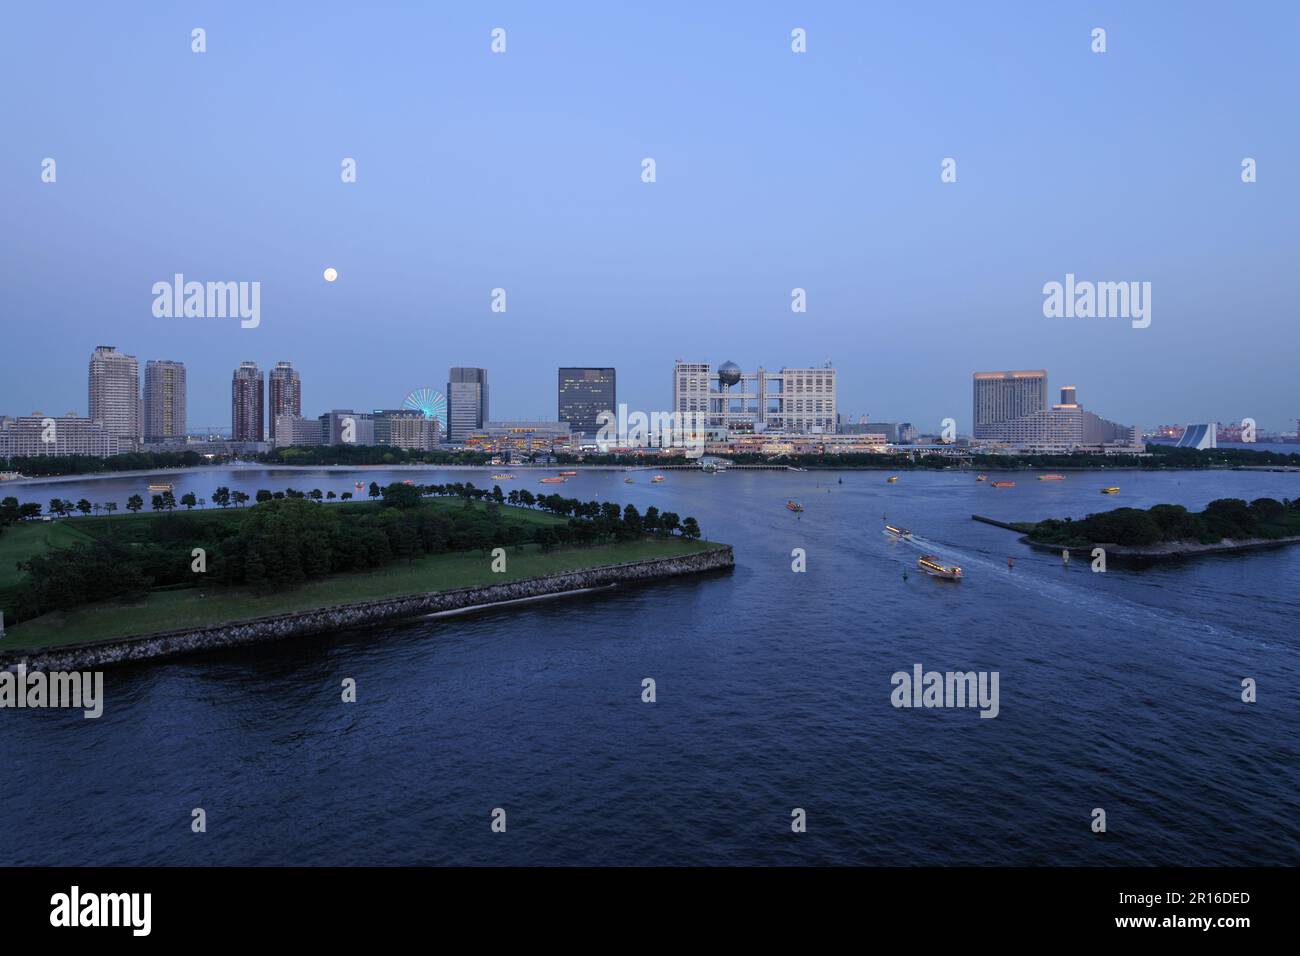 Full moon and Odaiba Seaside Park and maritime subcity center buldings Stock Photo